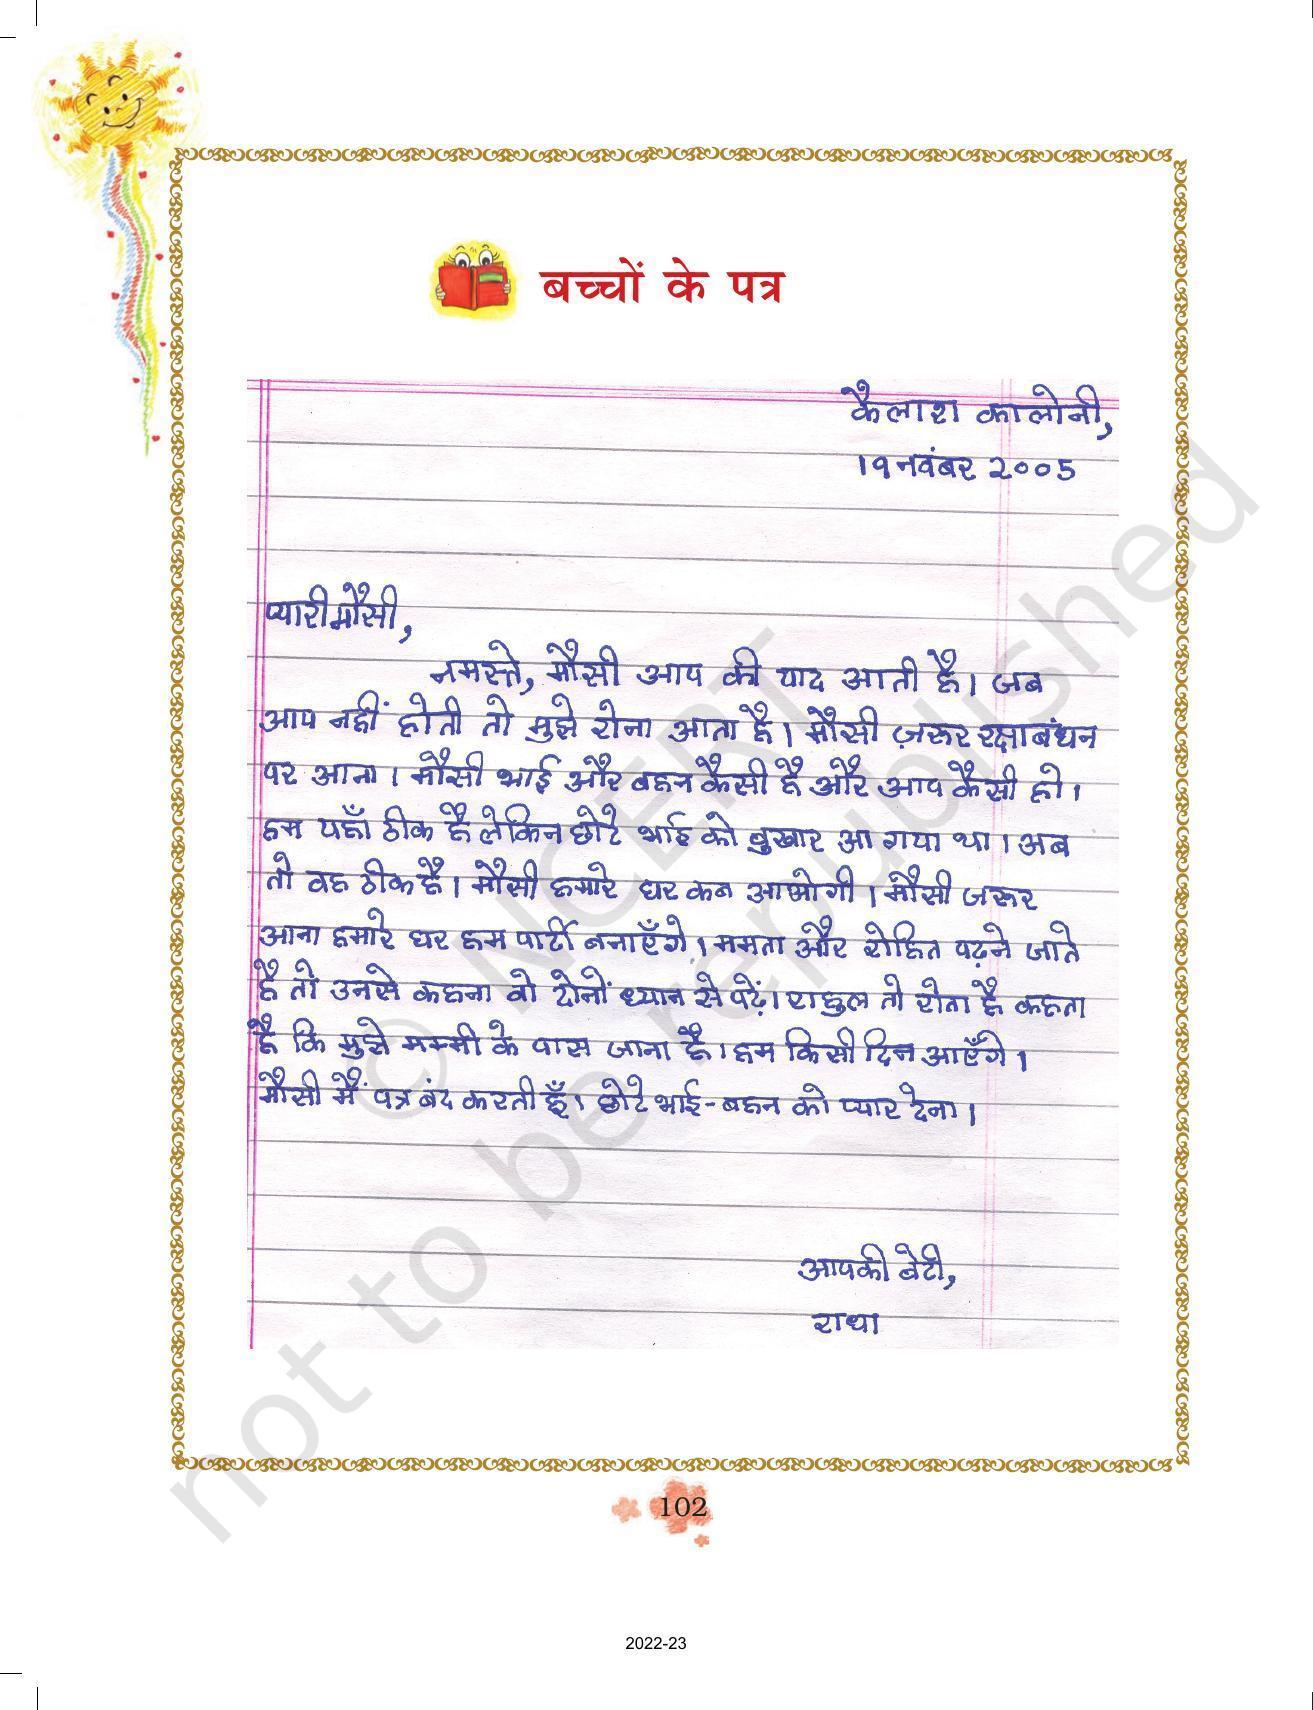 NCERT Book for Class 3 Hindi Chapter 10-जब मुझे साँप ने काटा - Page 10